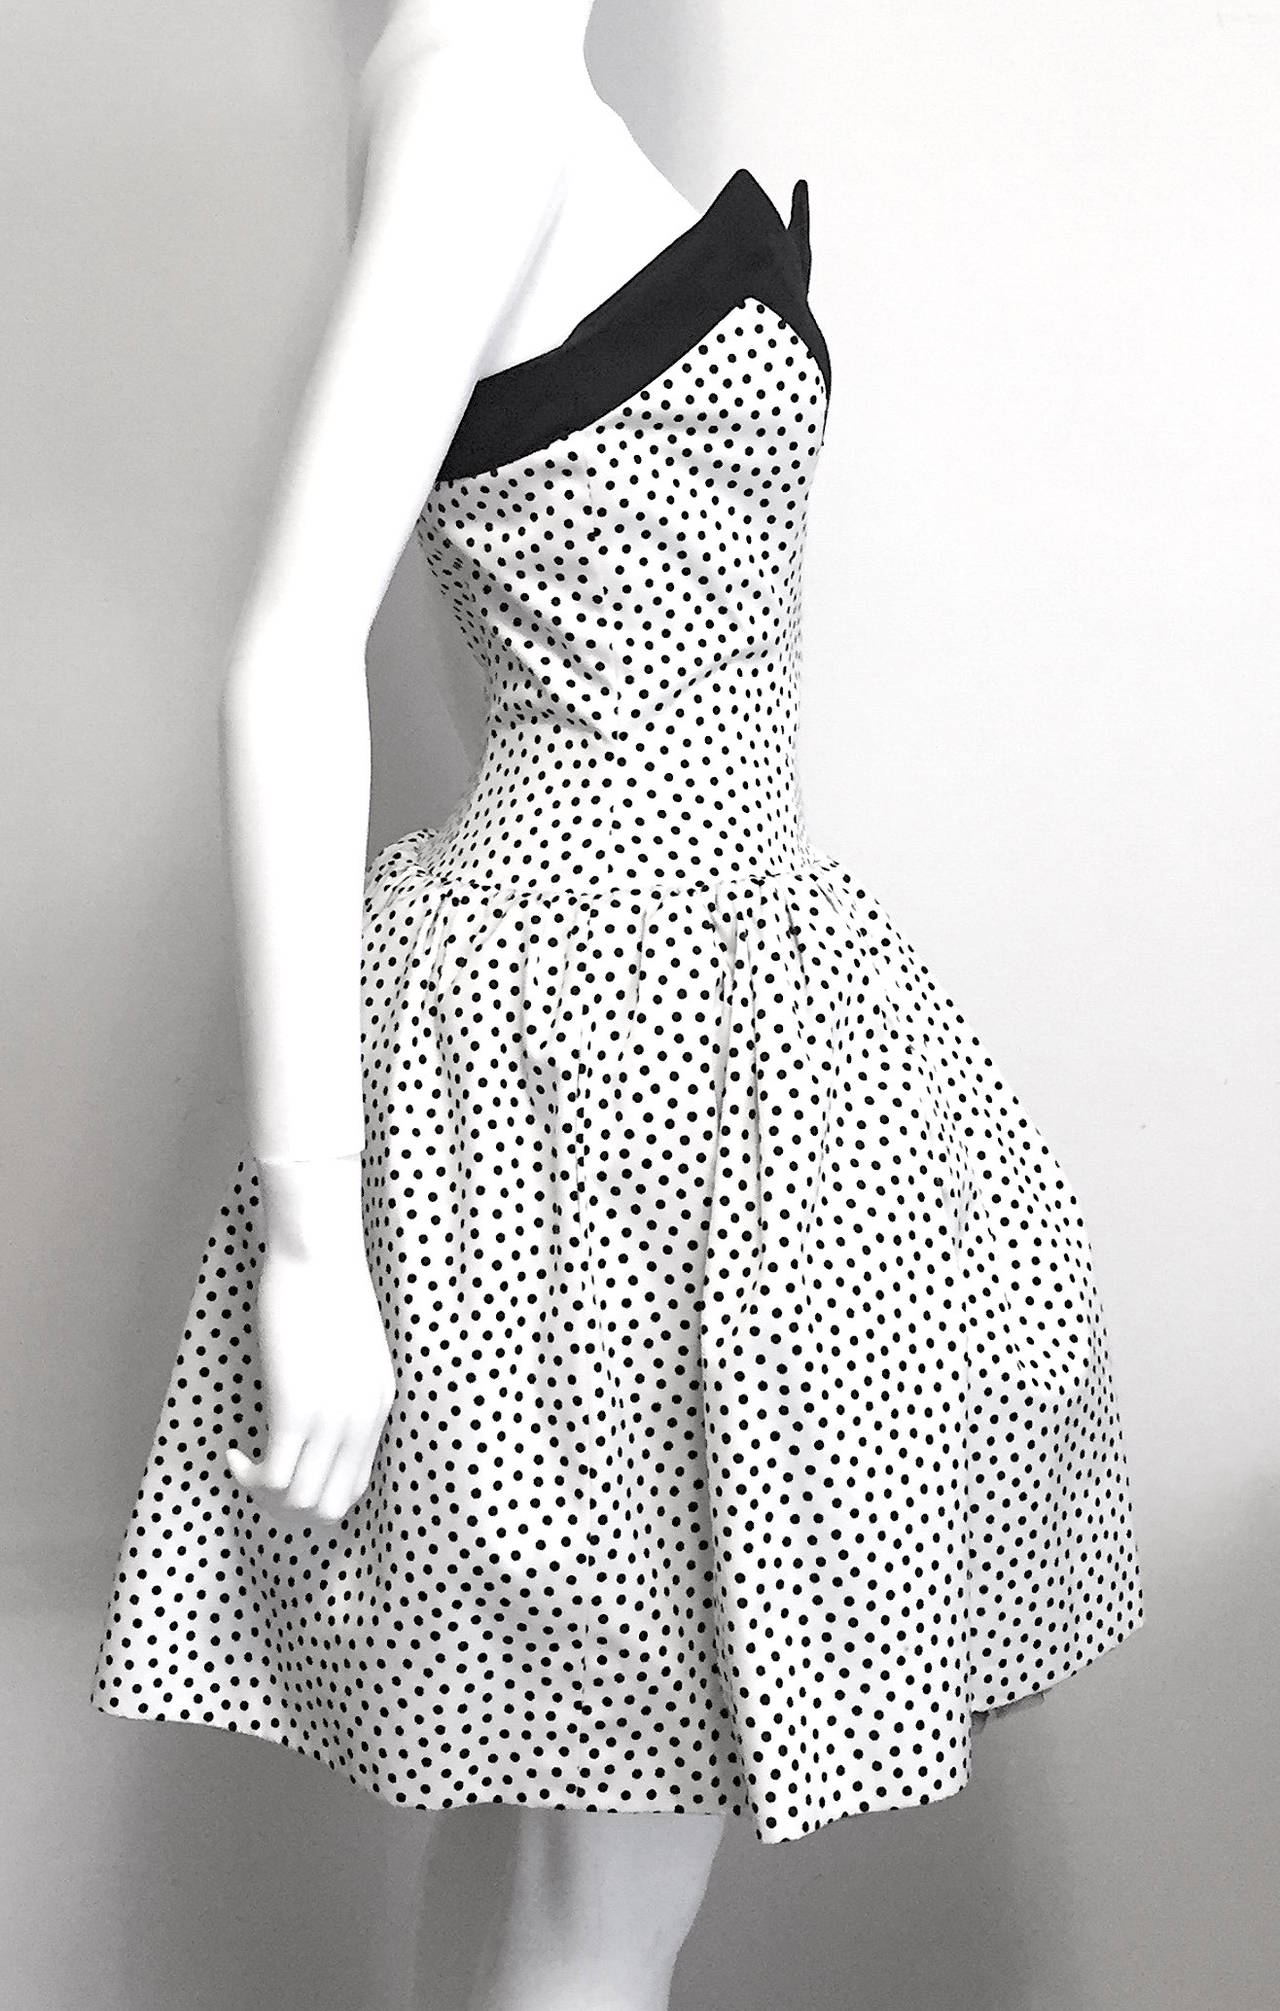 Lanvin Cocktail Dress With Zig Zag Neckline & Polka Dots, IT 36 In Good Condition For Sale In Bethesda, MD